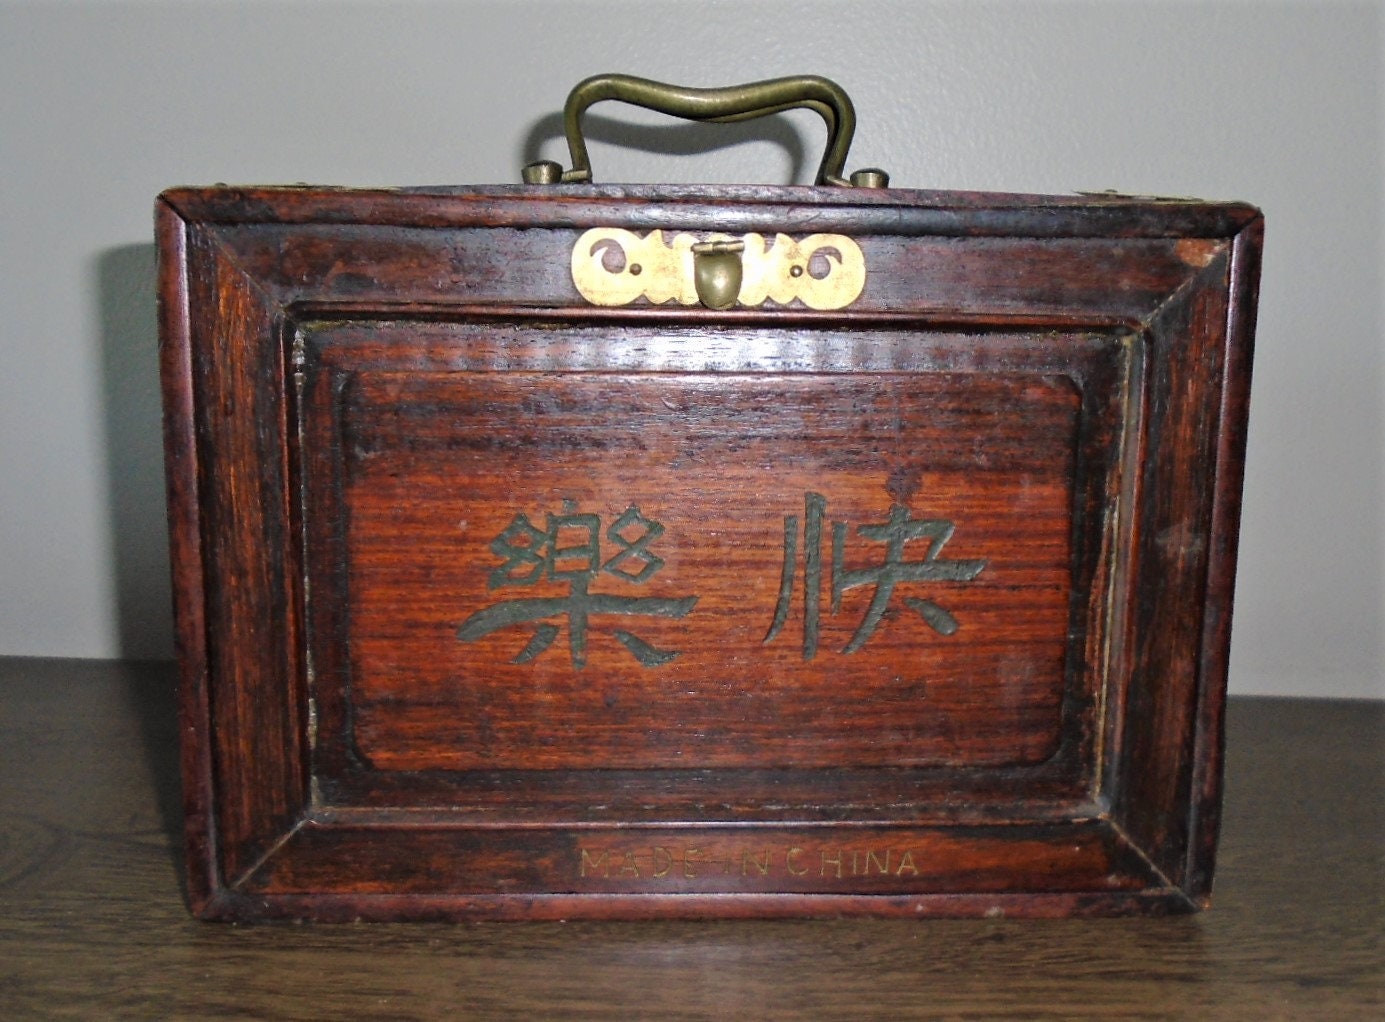 Sold at Auction: Antique Mahjong Set In Wooden Carved Box 1920's